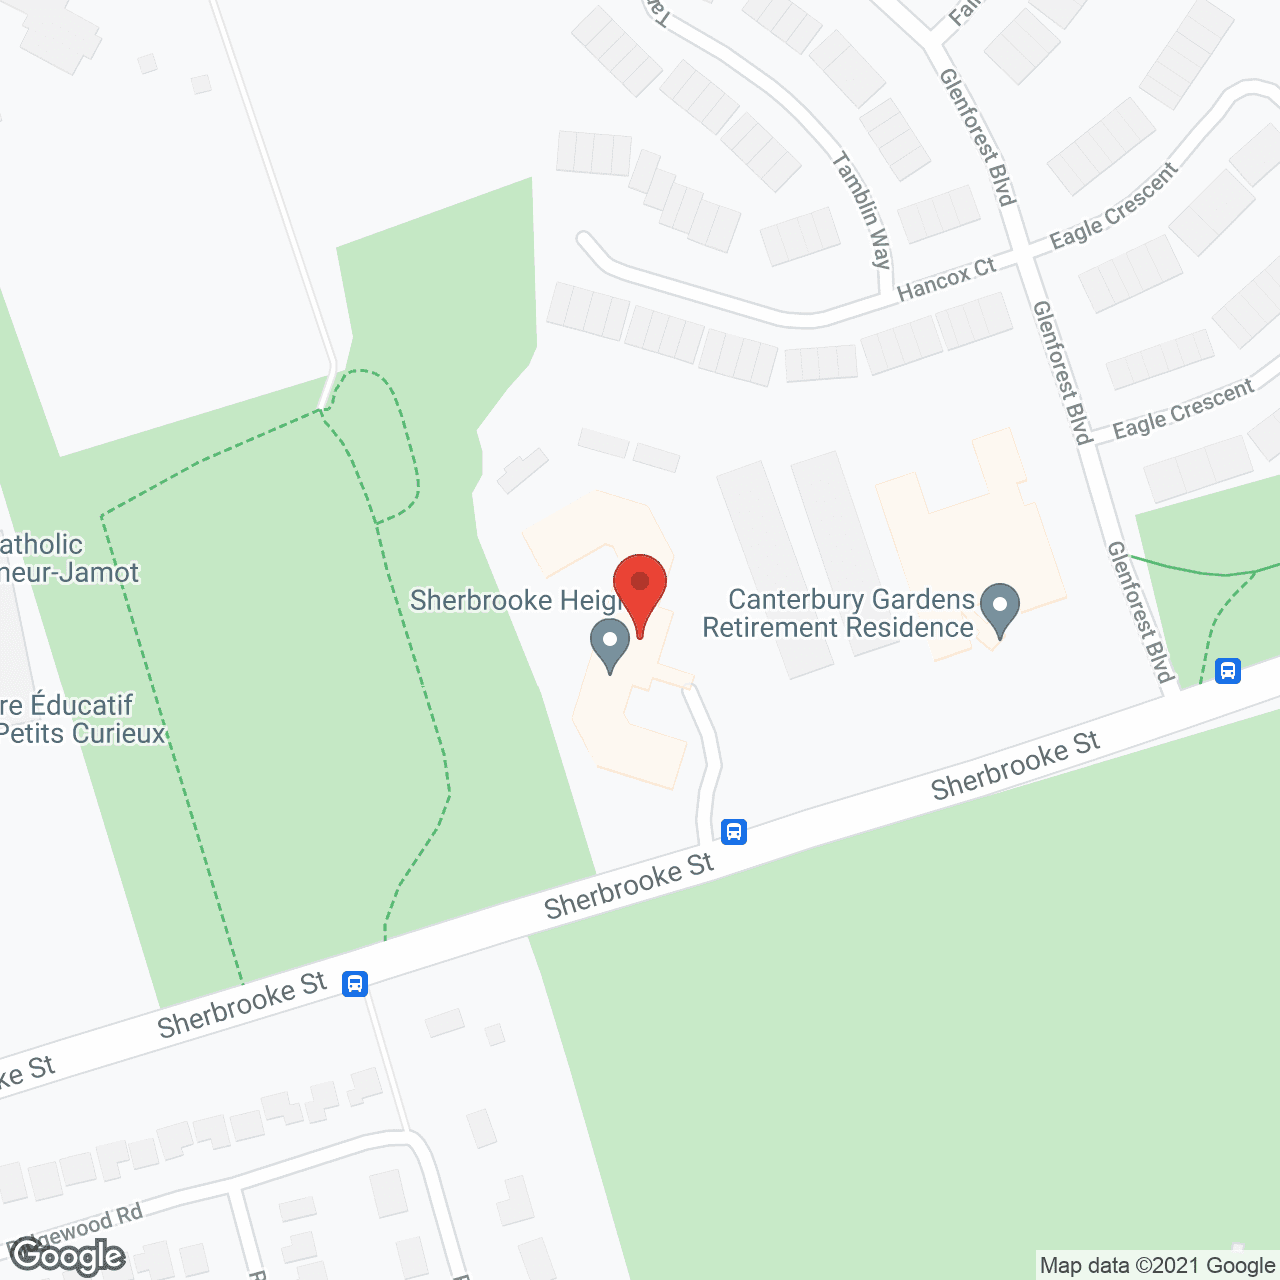 Sherbrooke Heights in google map